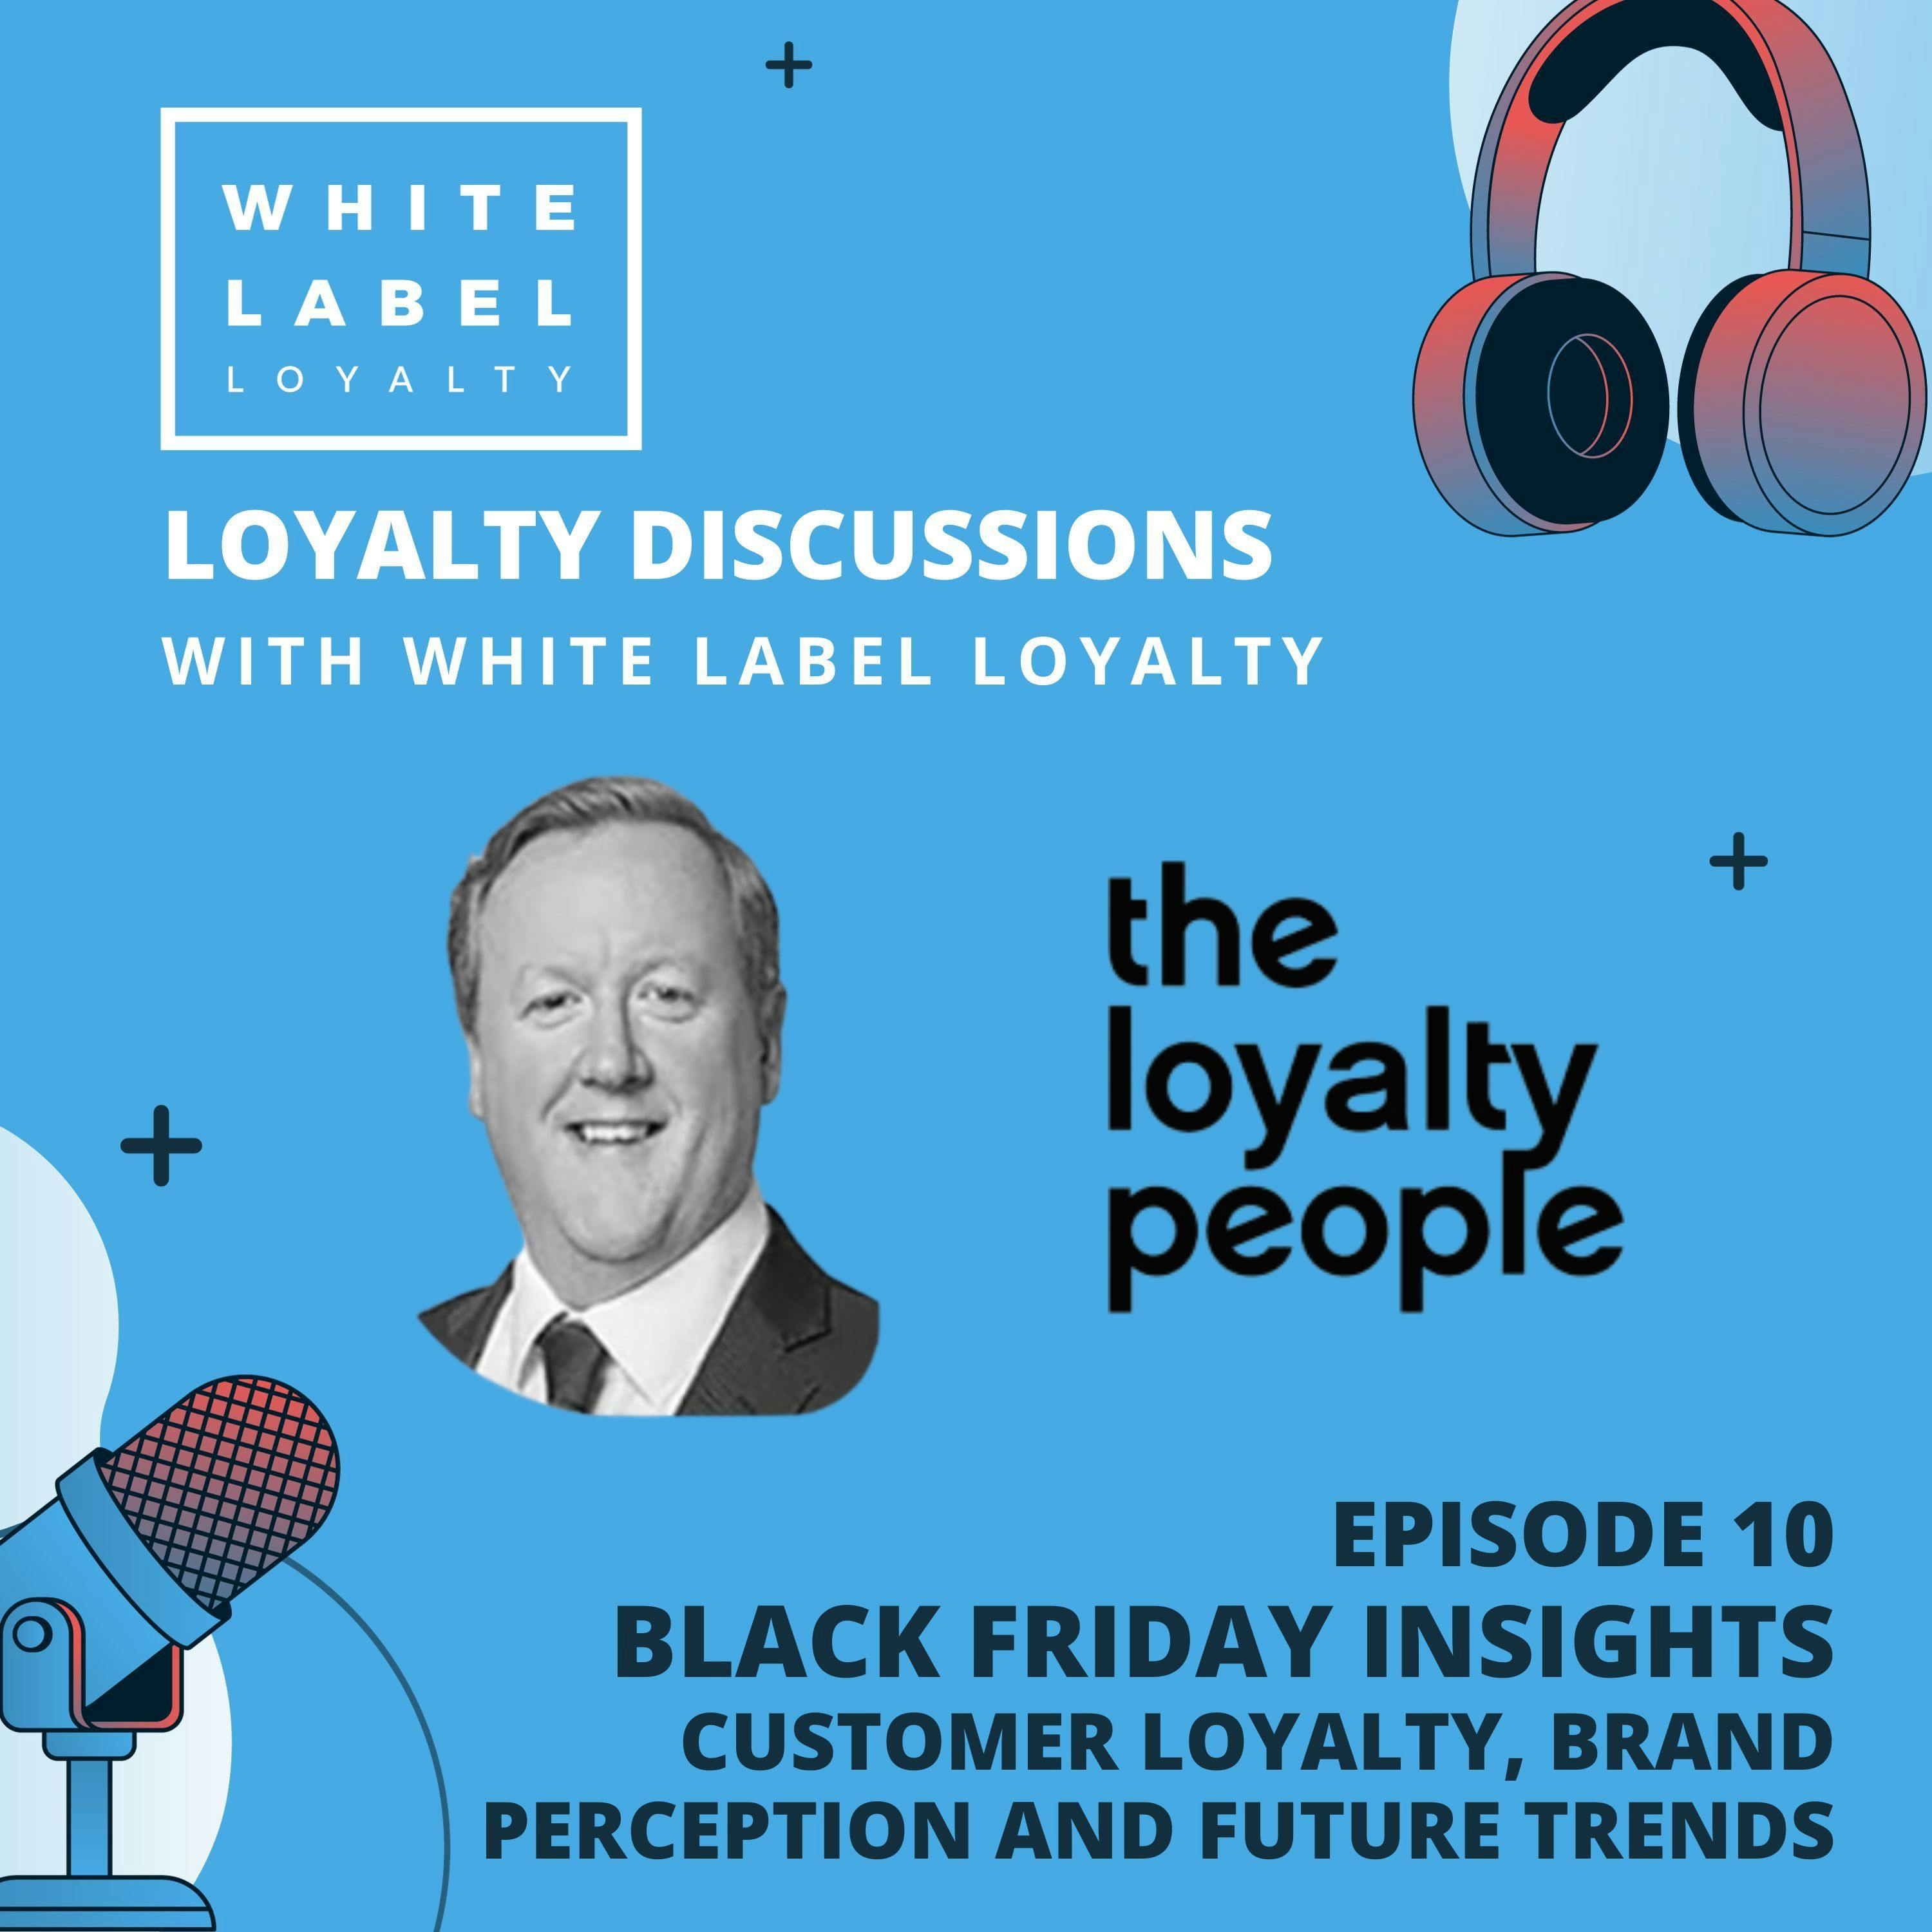 Black Friday Insights: Customer Loyalty, Brand Perception and Future Trends